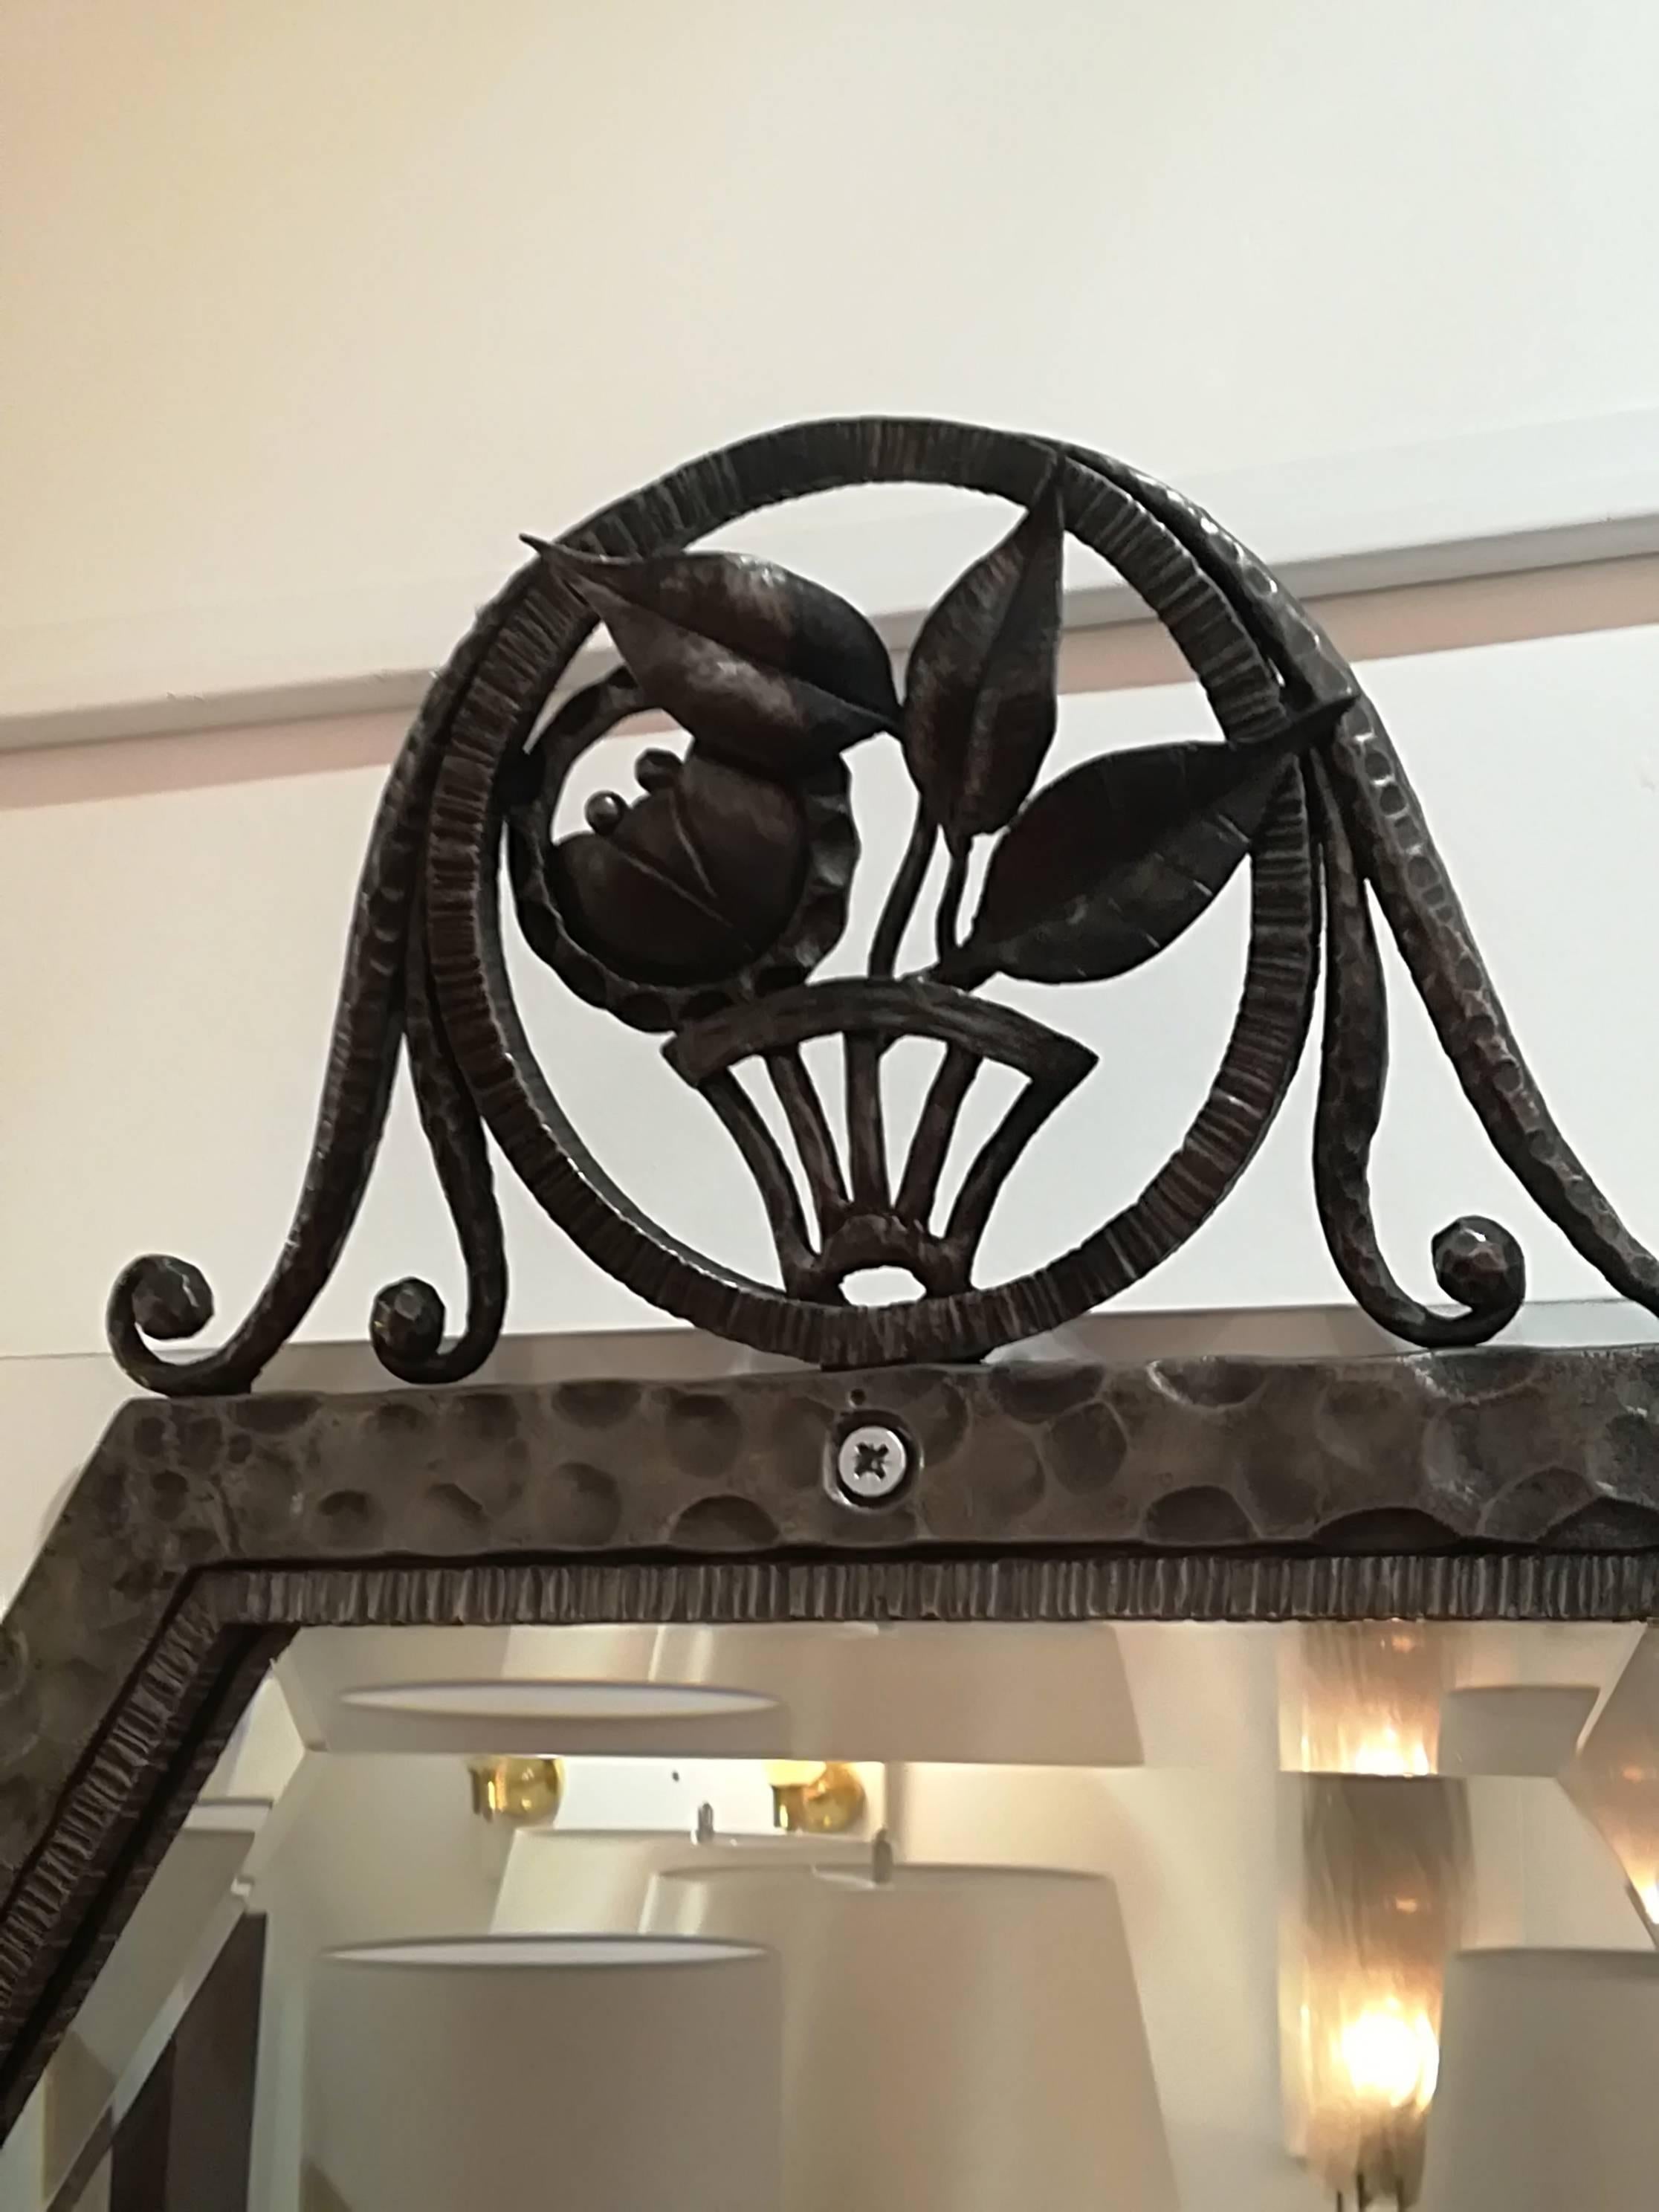 Charles Piguet (1887-1942)
Art Deco wrought iron mirror, circa 1930, in excellent condition.
Signed Piguet Lyon on the right.